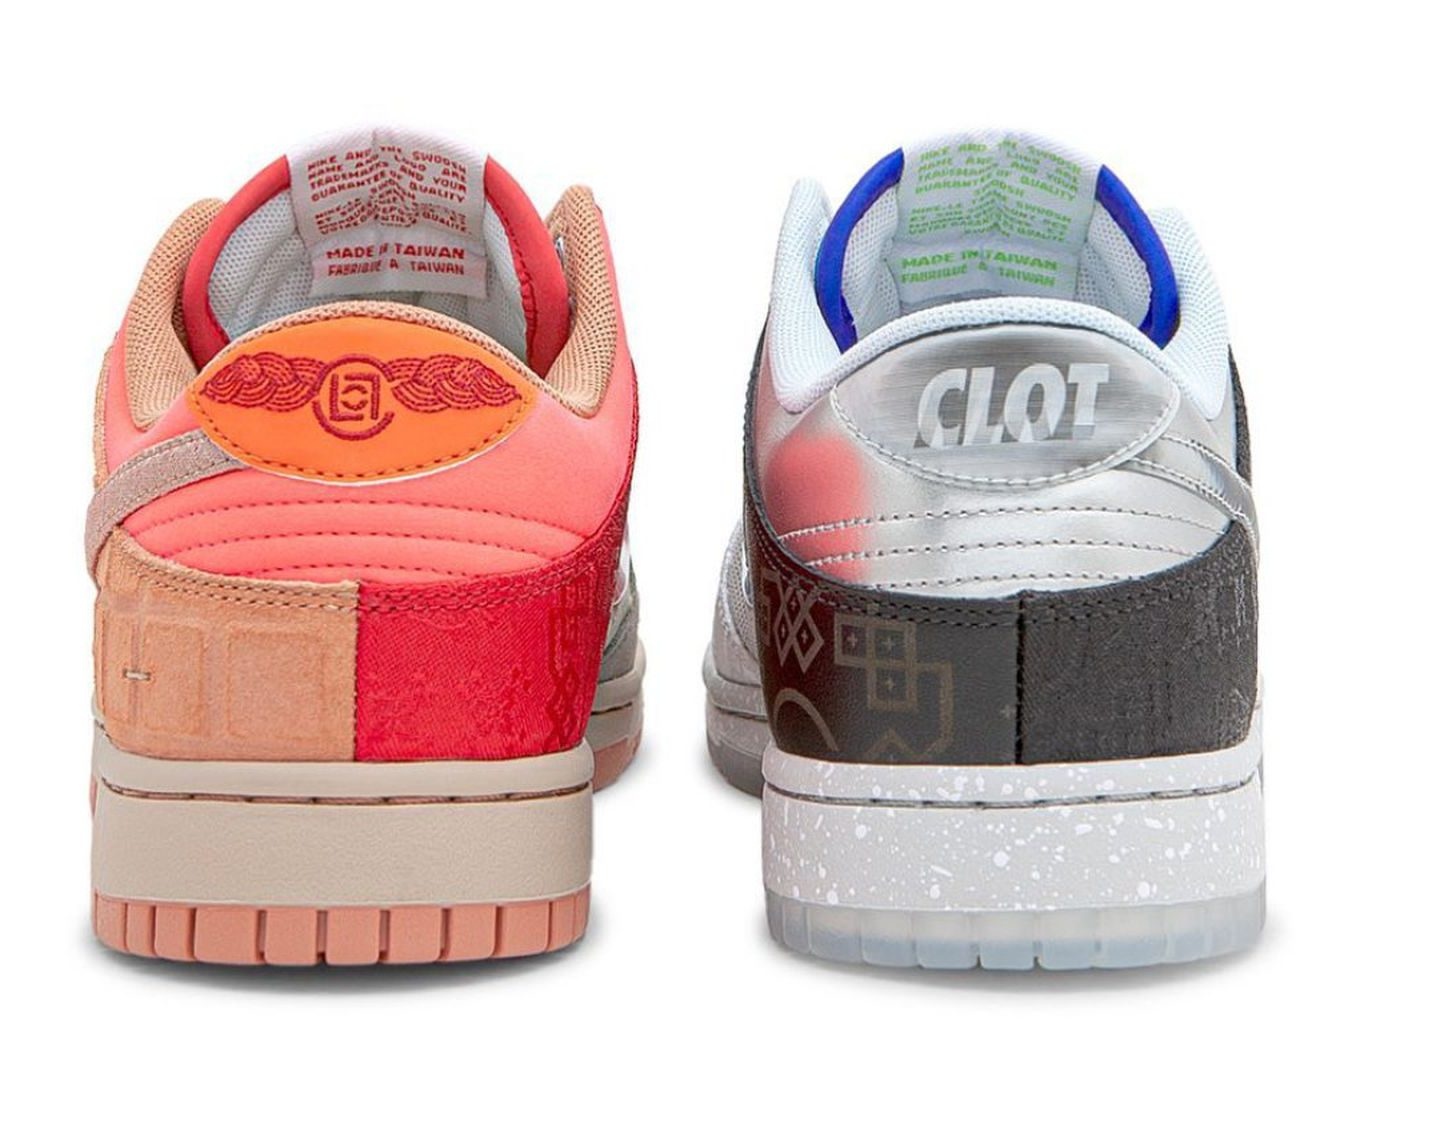 Nike and Clot merge their signatures to create the ultimate marriage of the east and west. Photo: Clot x Nike